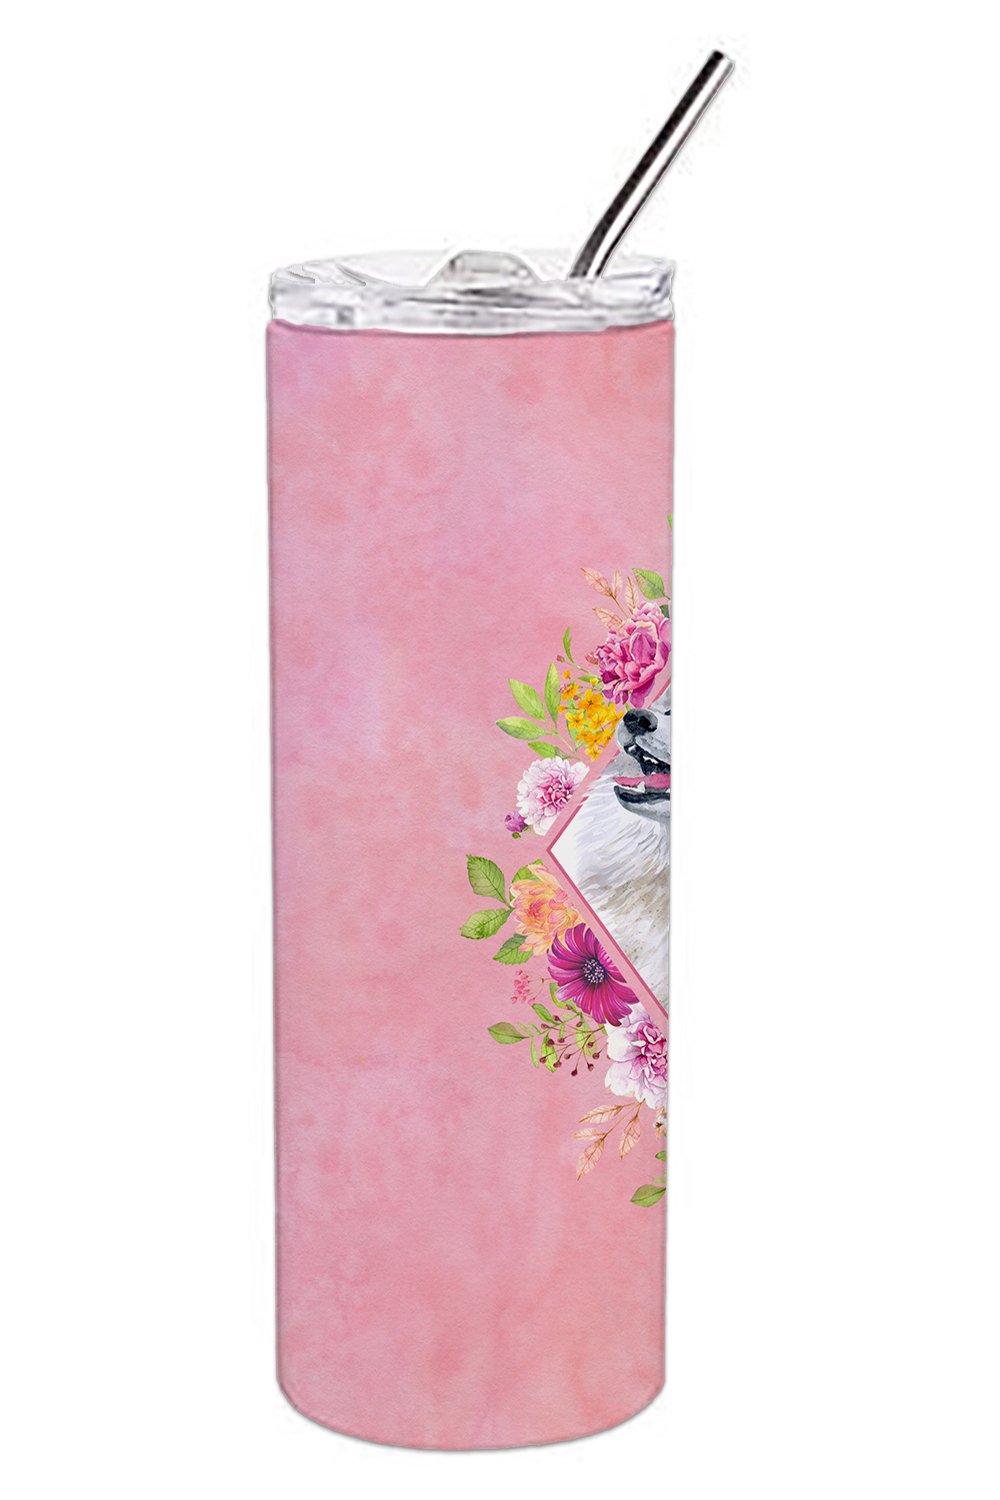 Samoyed Pink Flowers Double Walled Stainless Steel 20 oz Skinny Tumbler CK4177TBL20 by Caroline's Treasures